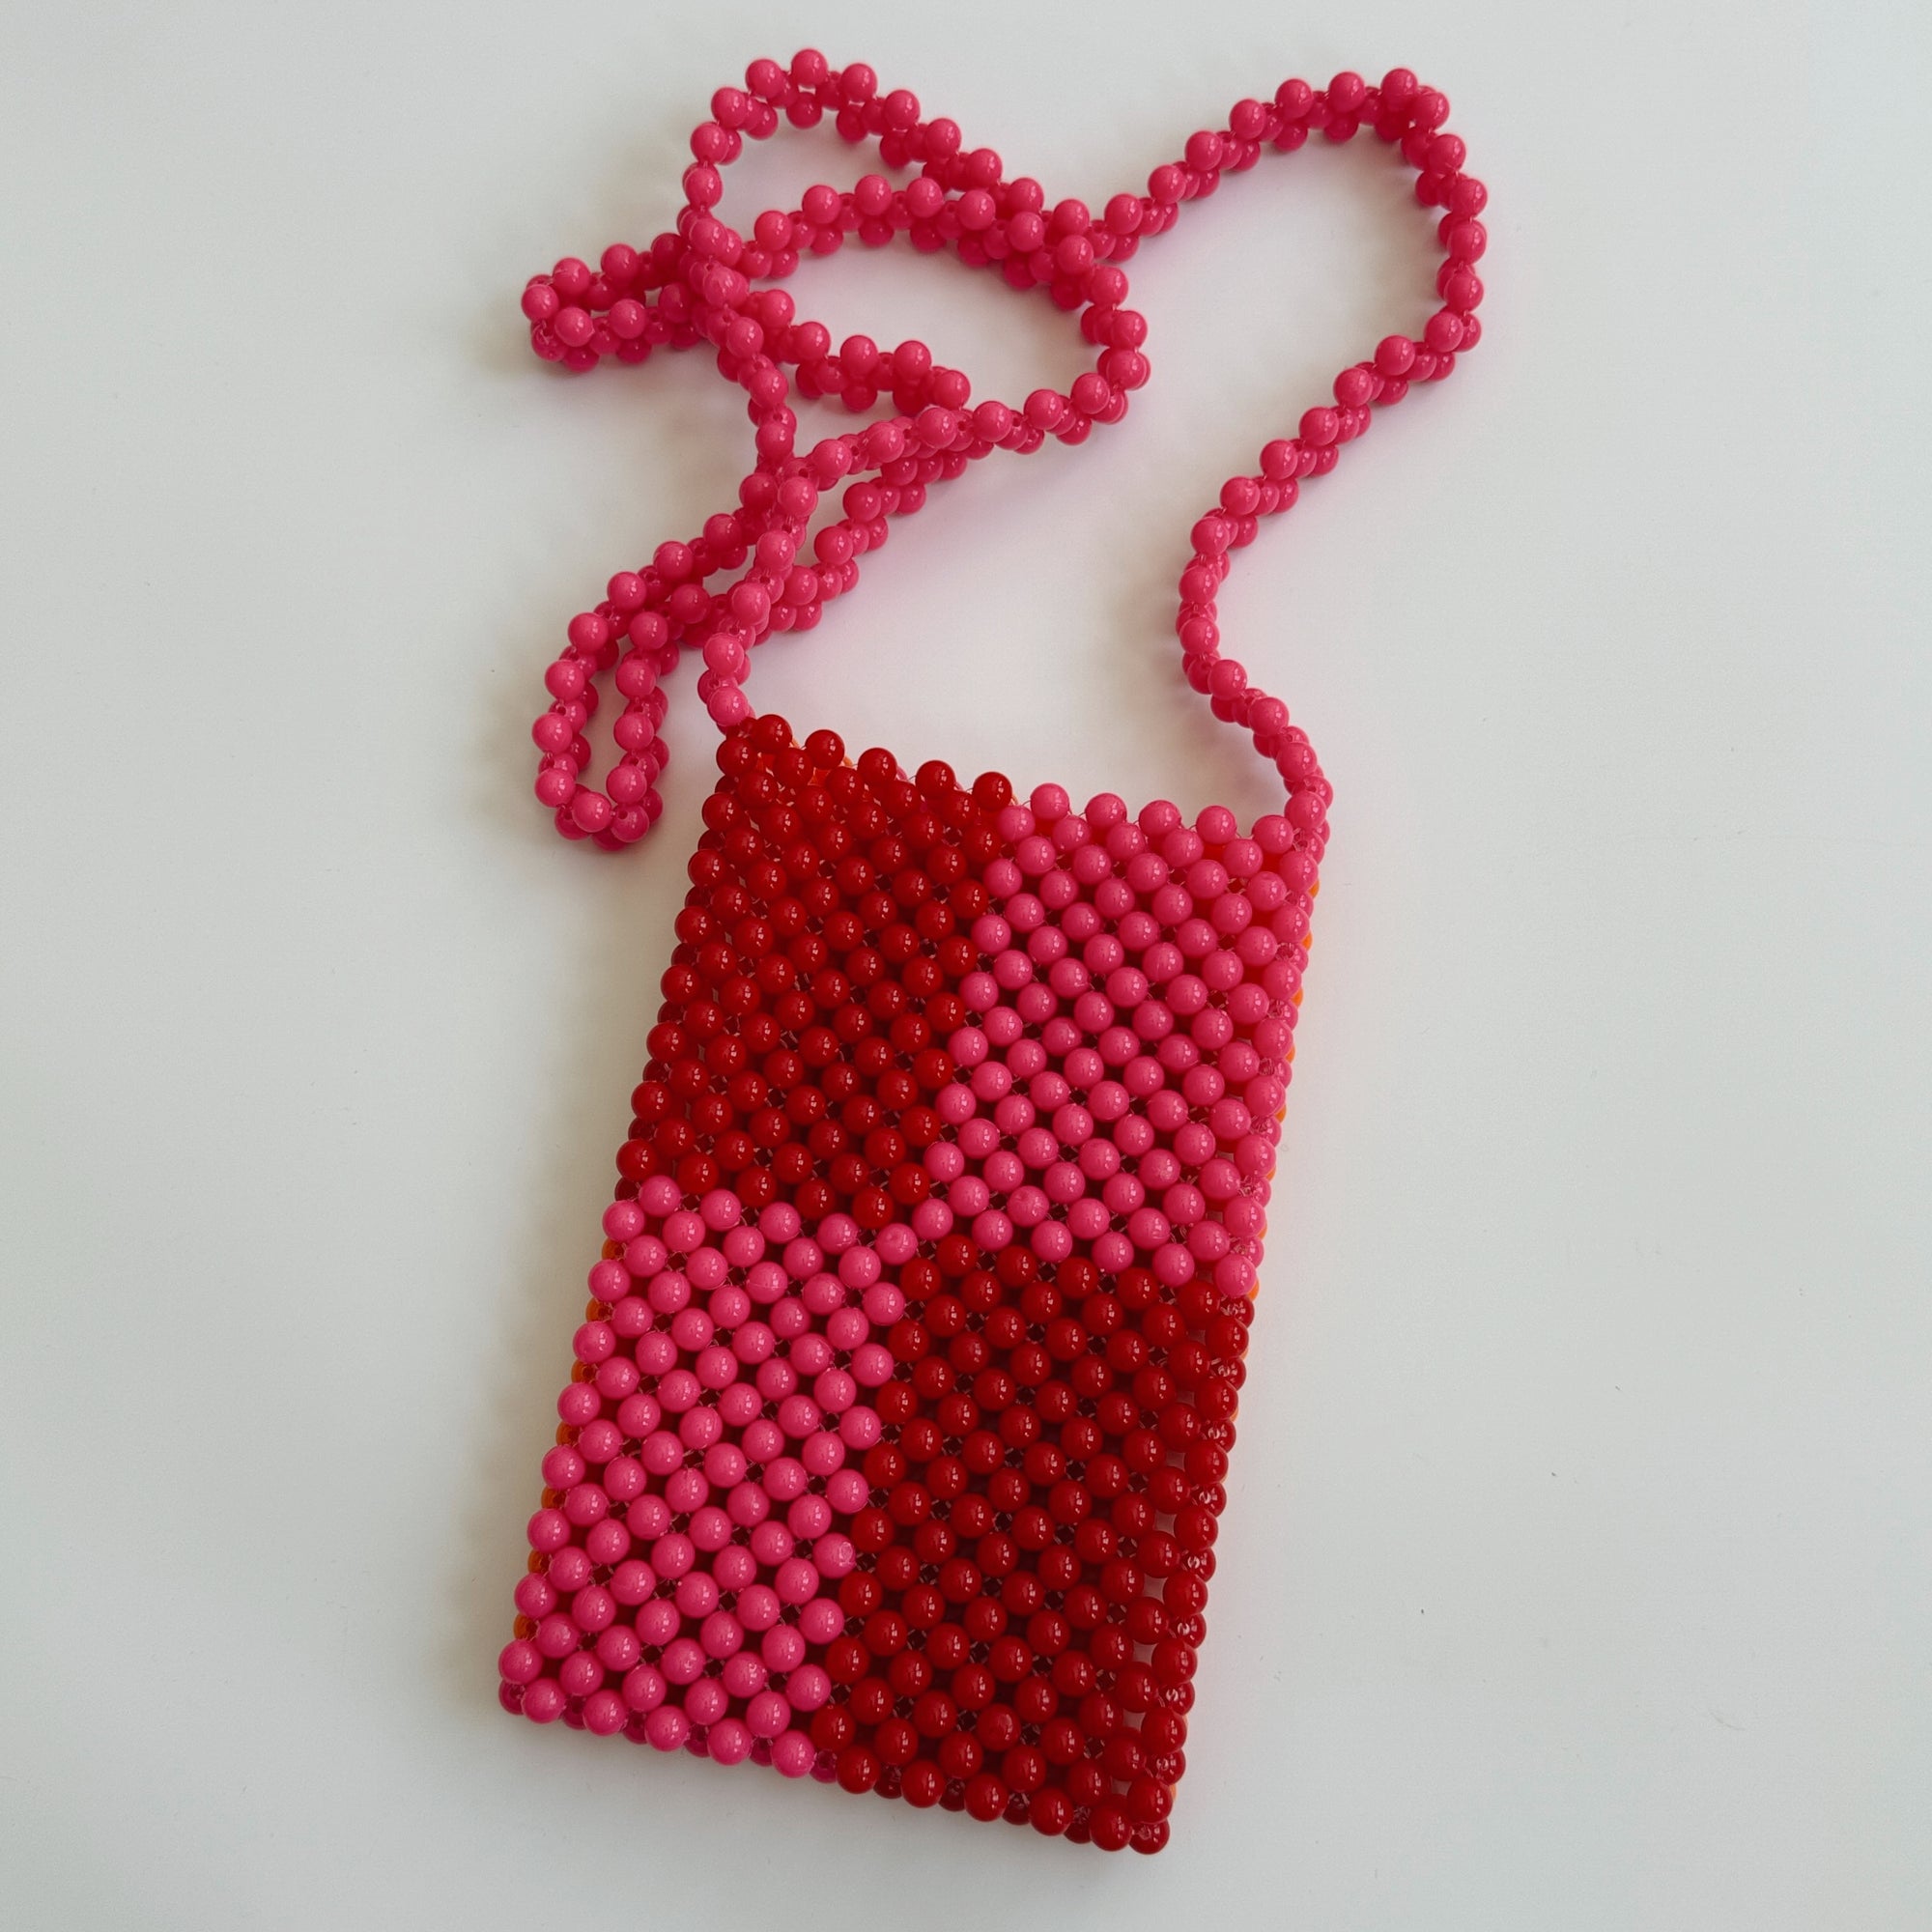 HIBISCUS THE LABEL BEADED PHONE BAG: RED/PINK